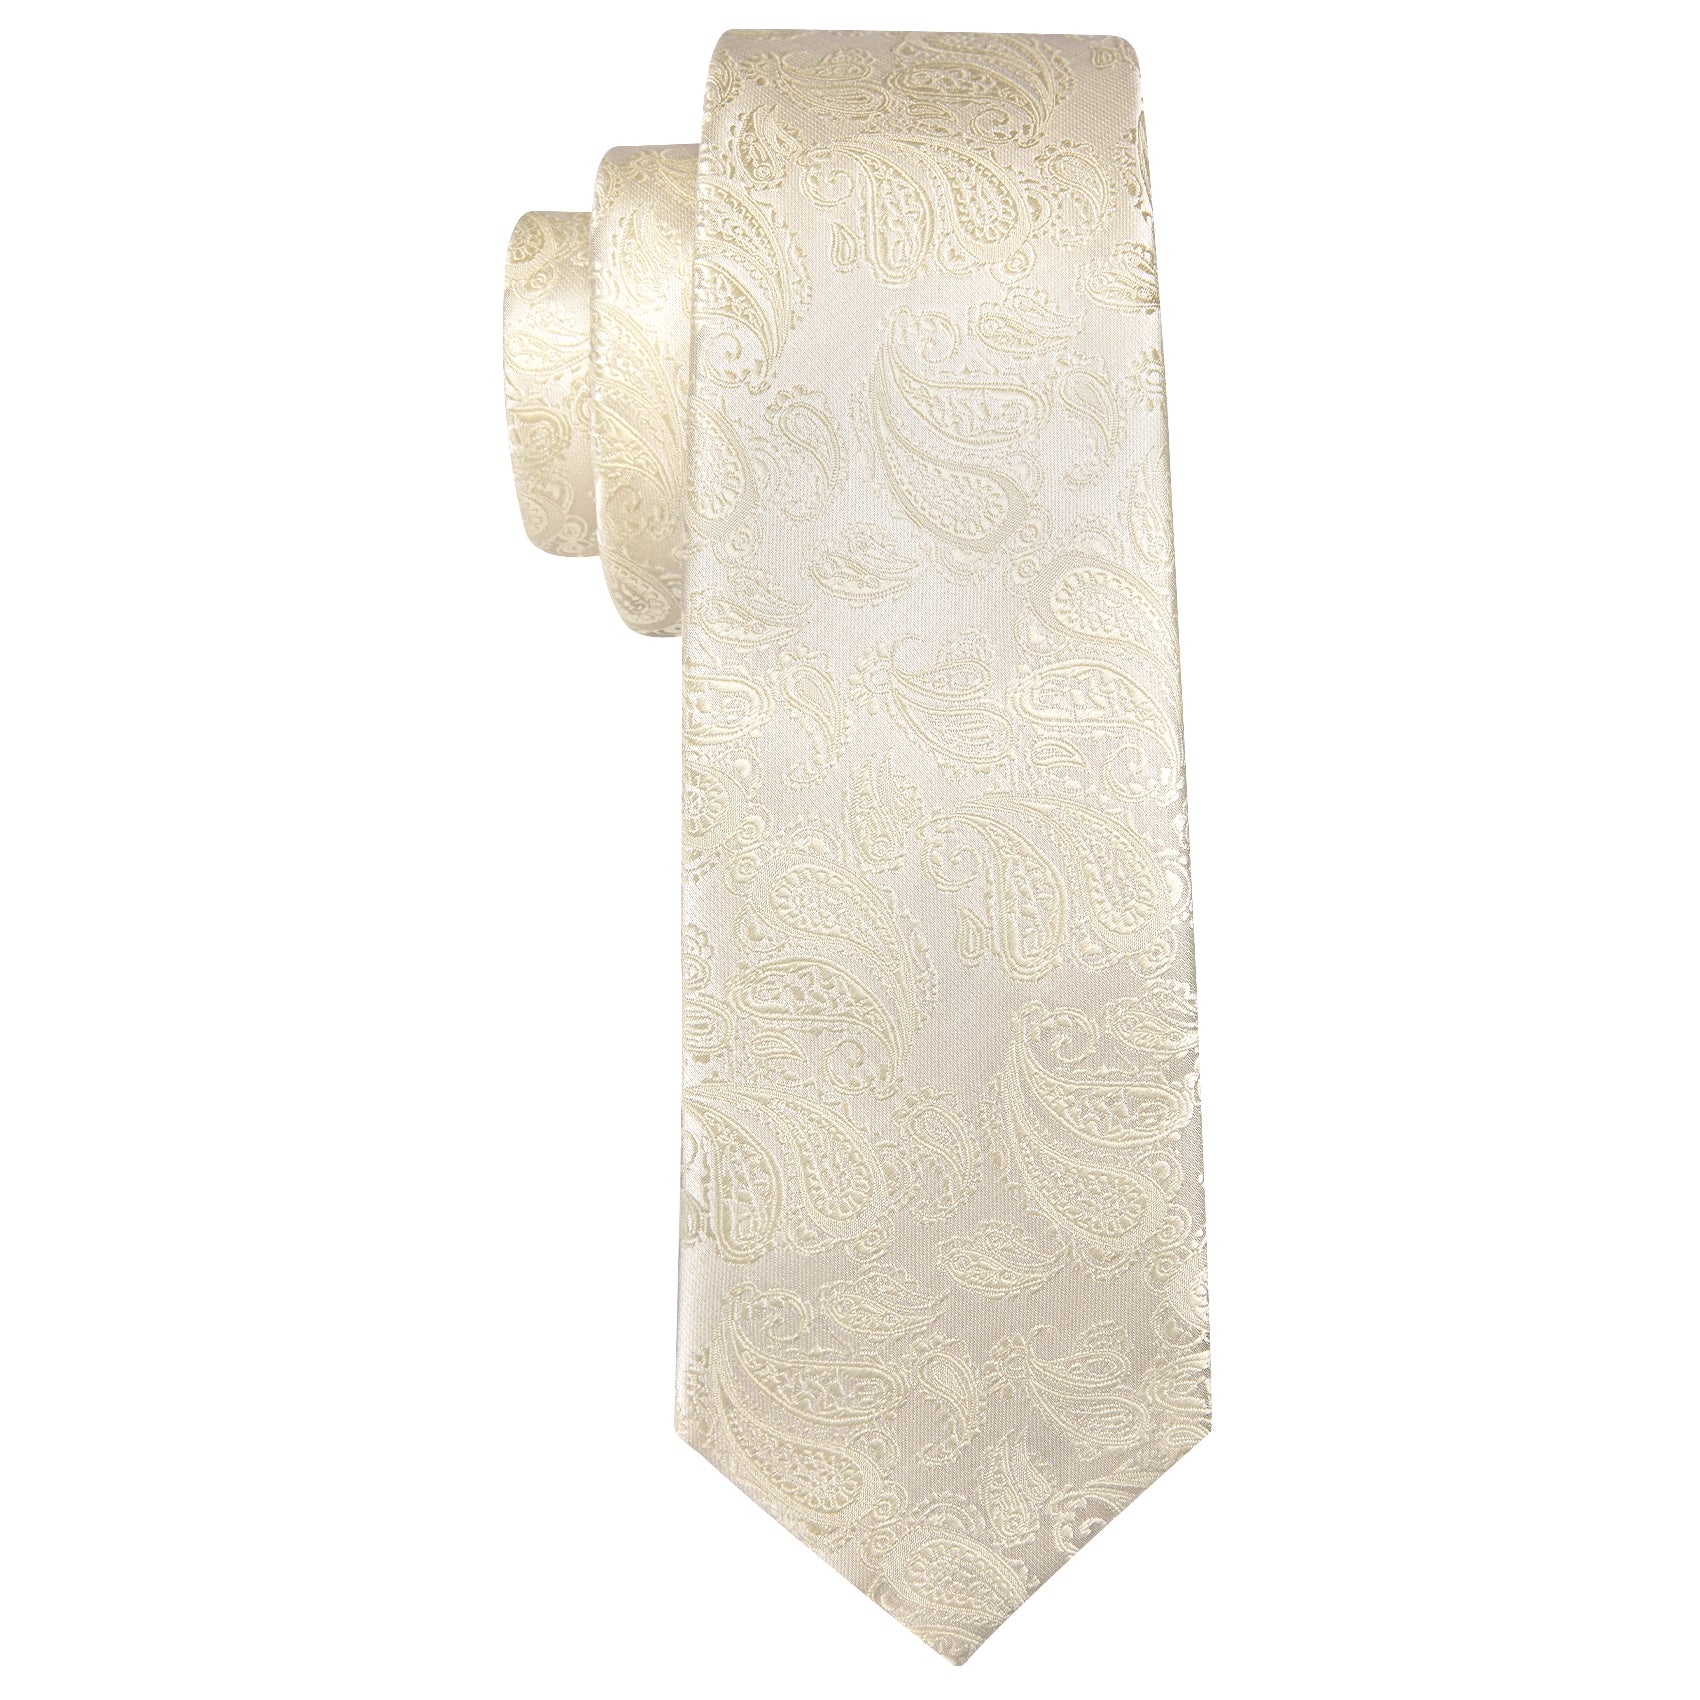 Champagne Paisley Silk 63 Inches Extra Long Tie Hanky Cufflinks Set